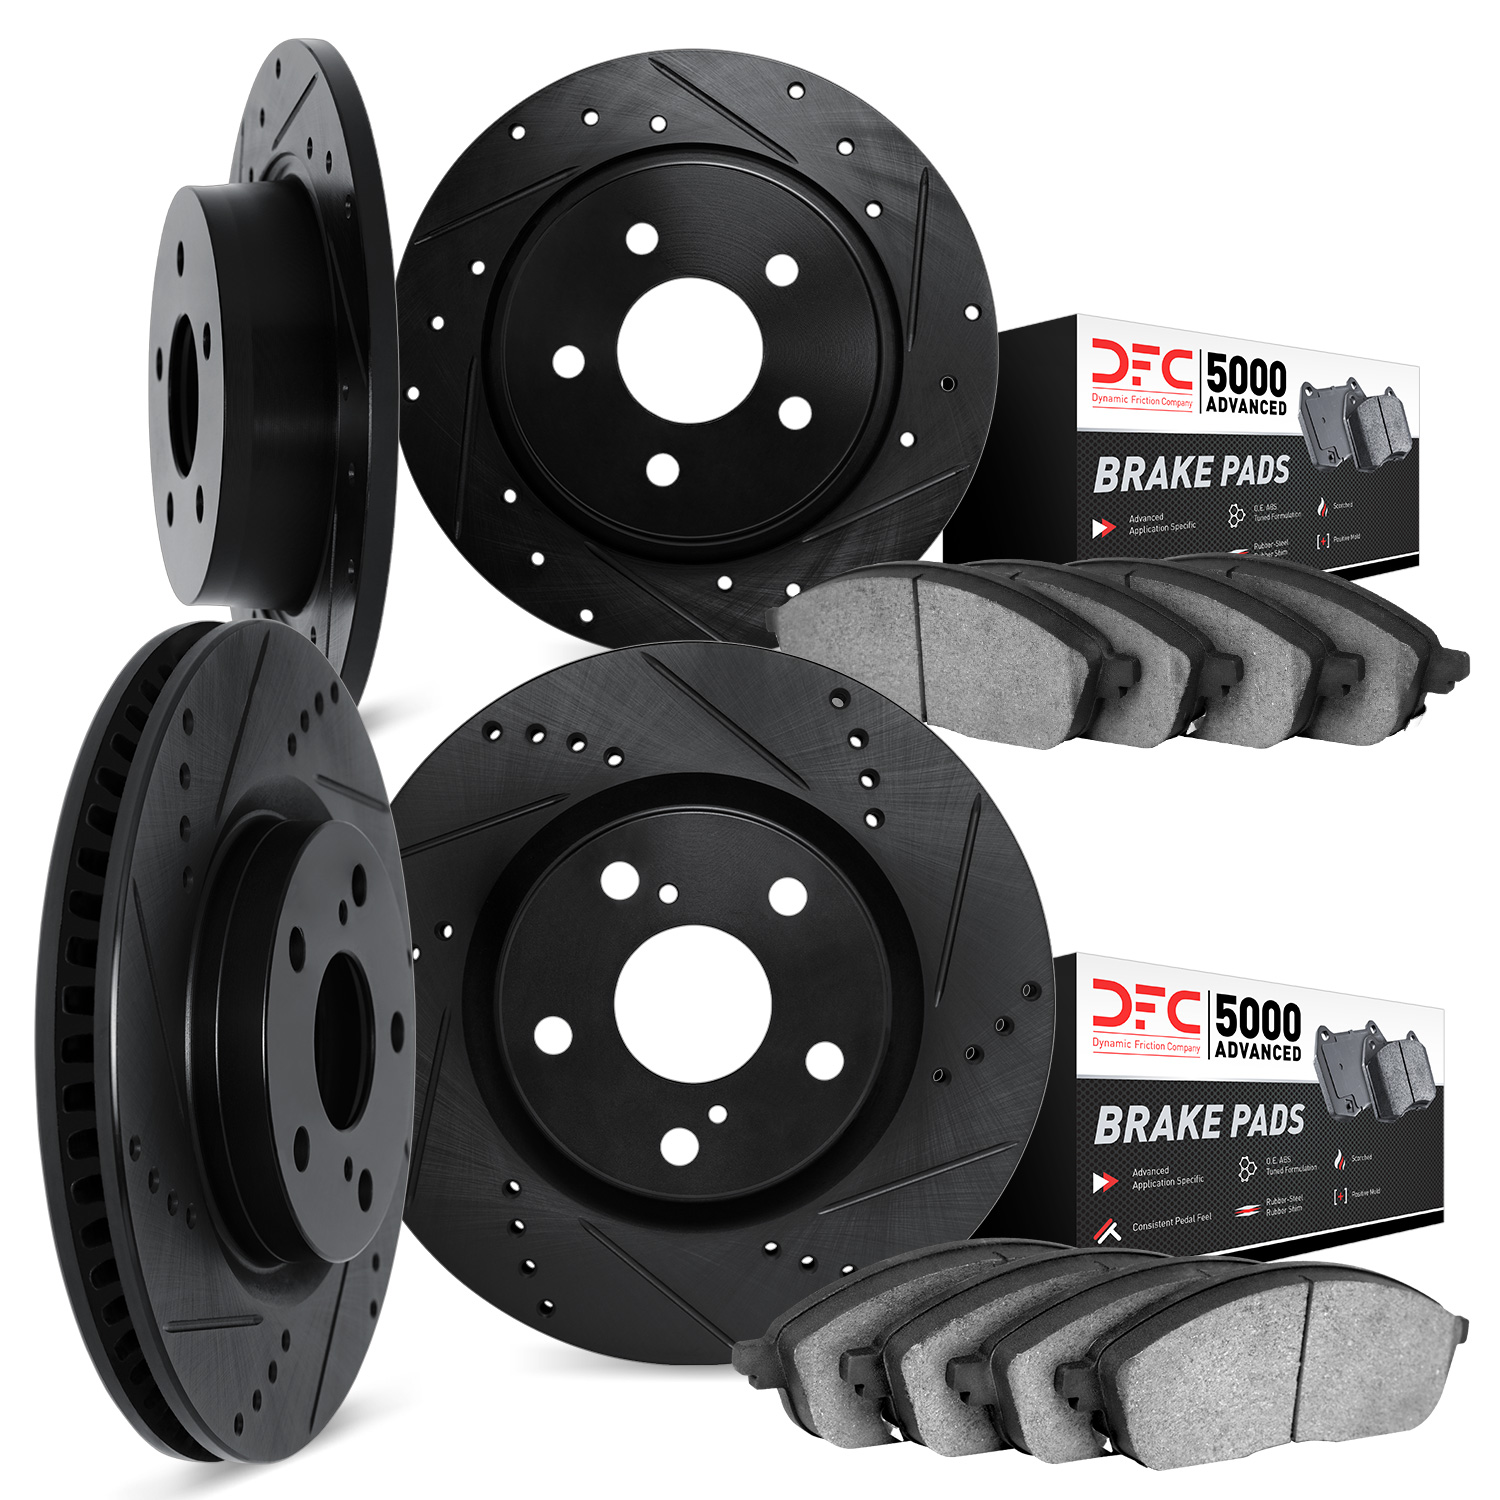 8504-13012 Drilled/Slotted Brake Rotors w/5000 Advanced Brake Pads Kit [Black], 2015-2021 Subaru, Position: Front and Rear